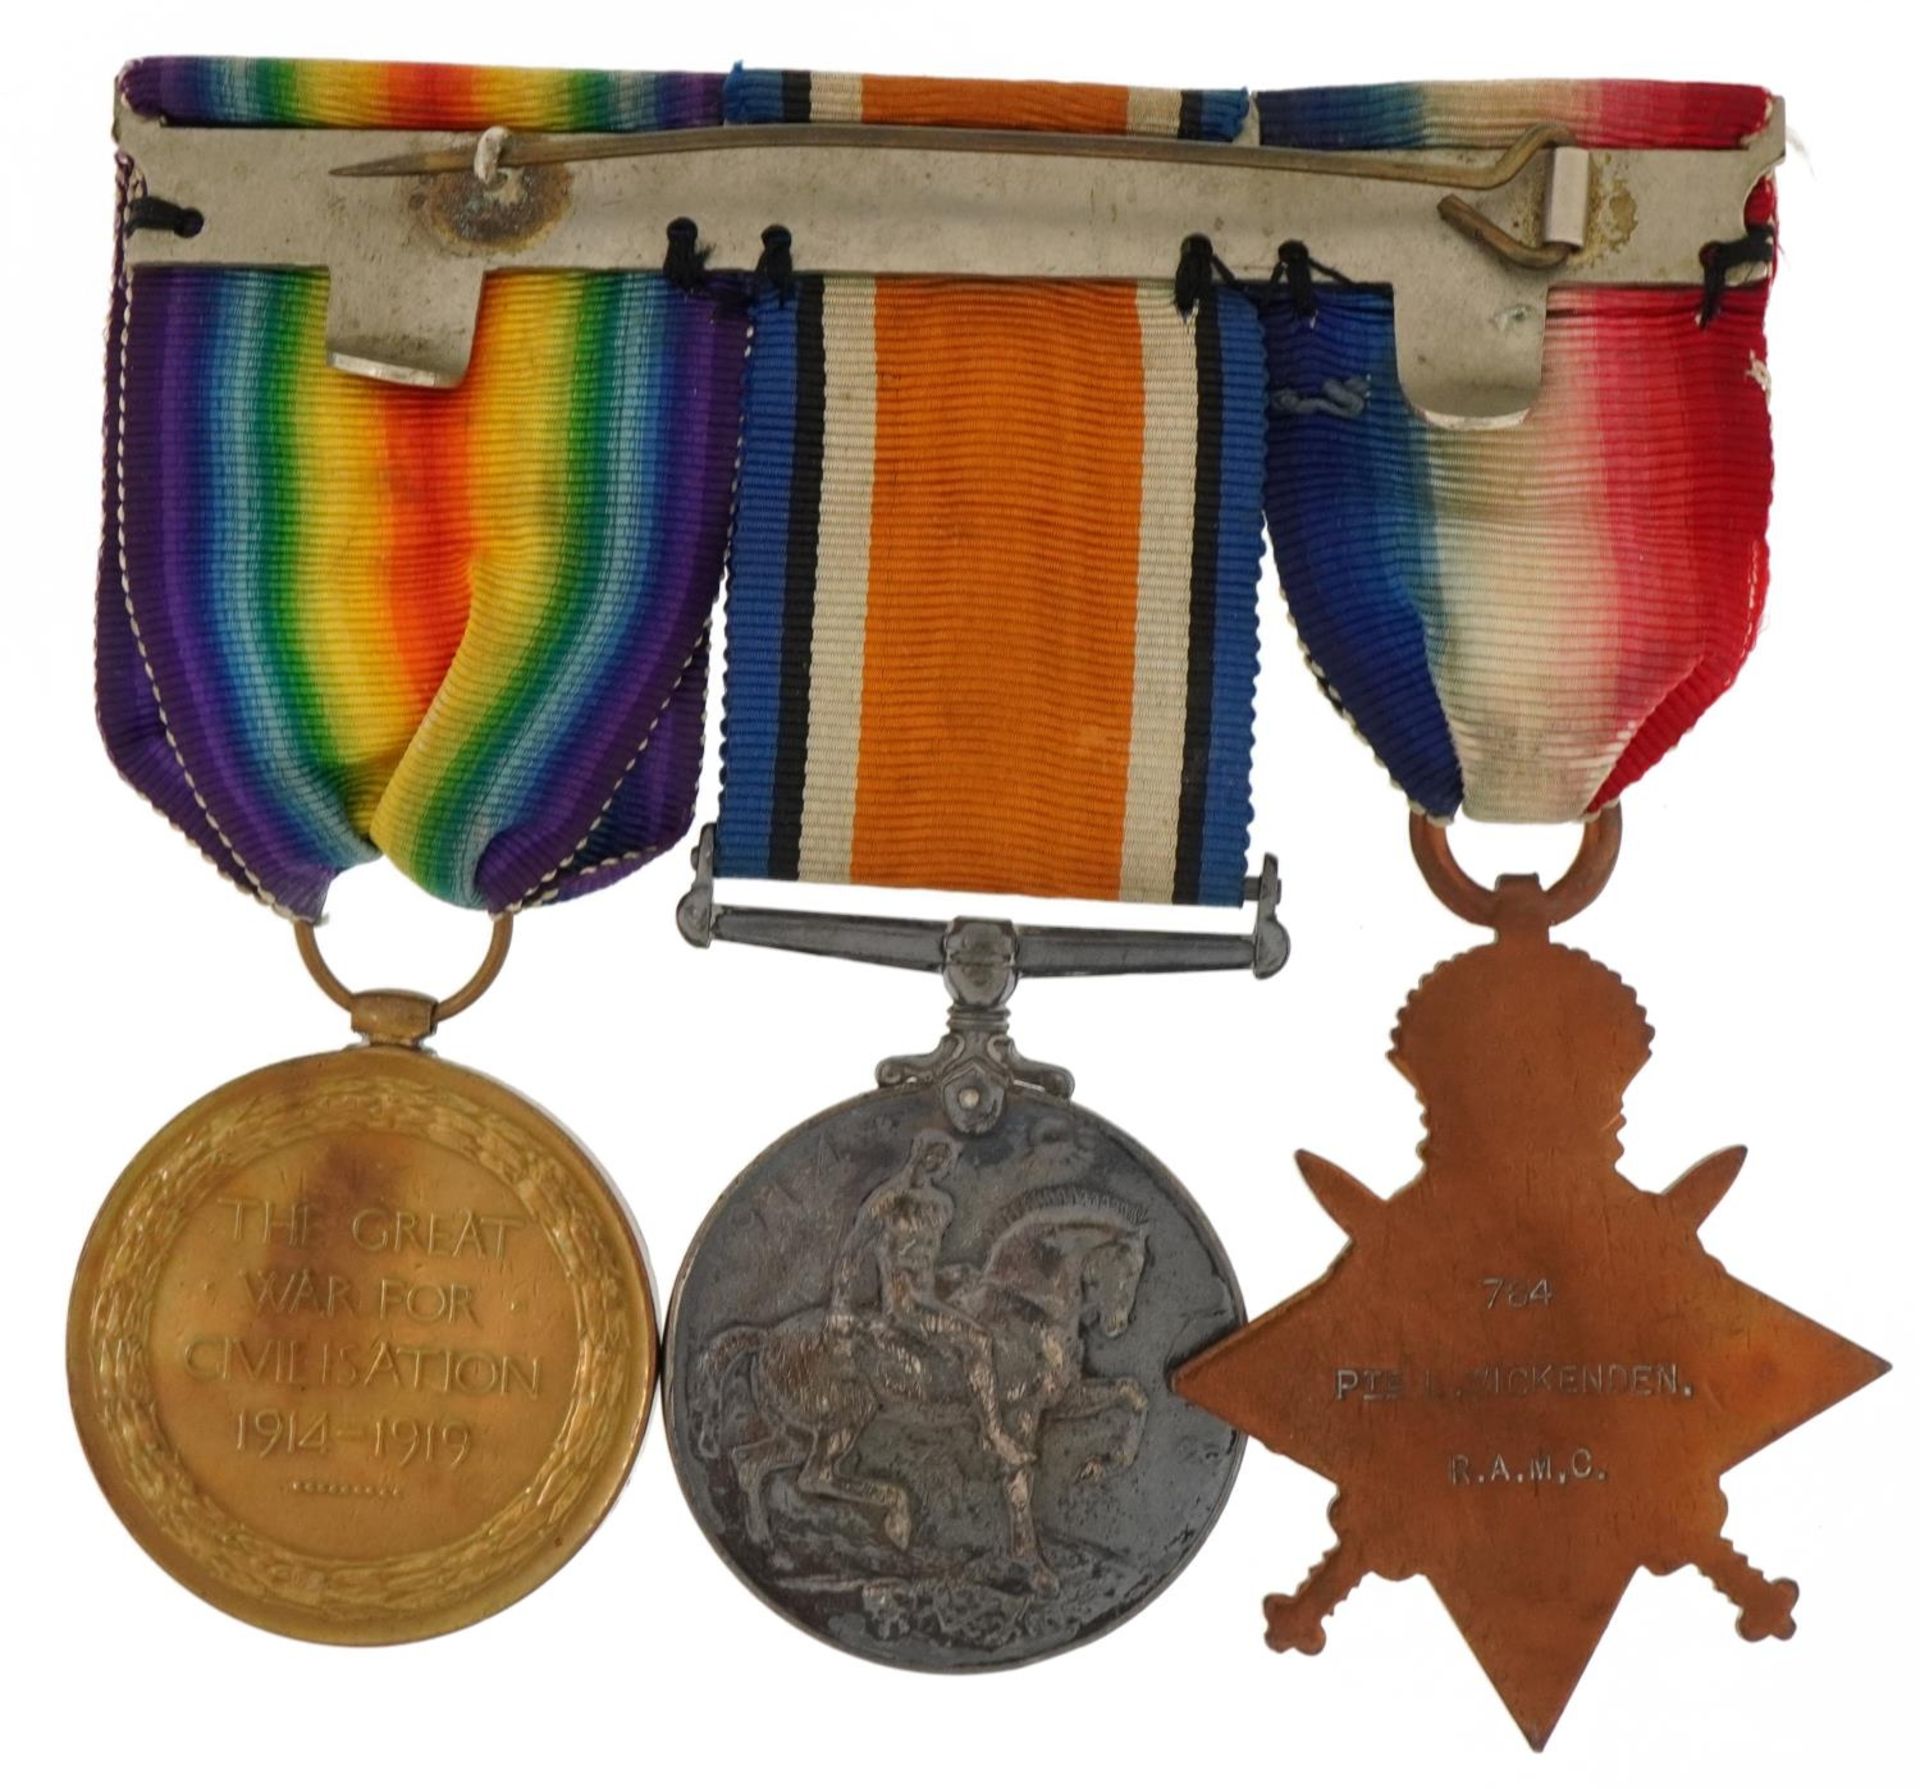 British military World War I trio with Mons star and 5th Aug-22nd Nov 1914 bar awarded to 784PTE.L. - Image 3 of 5